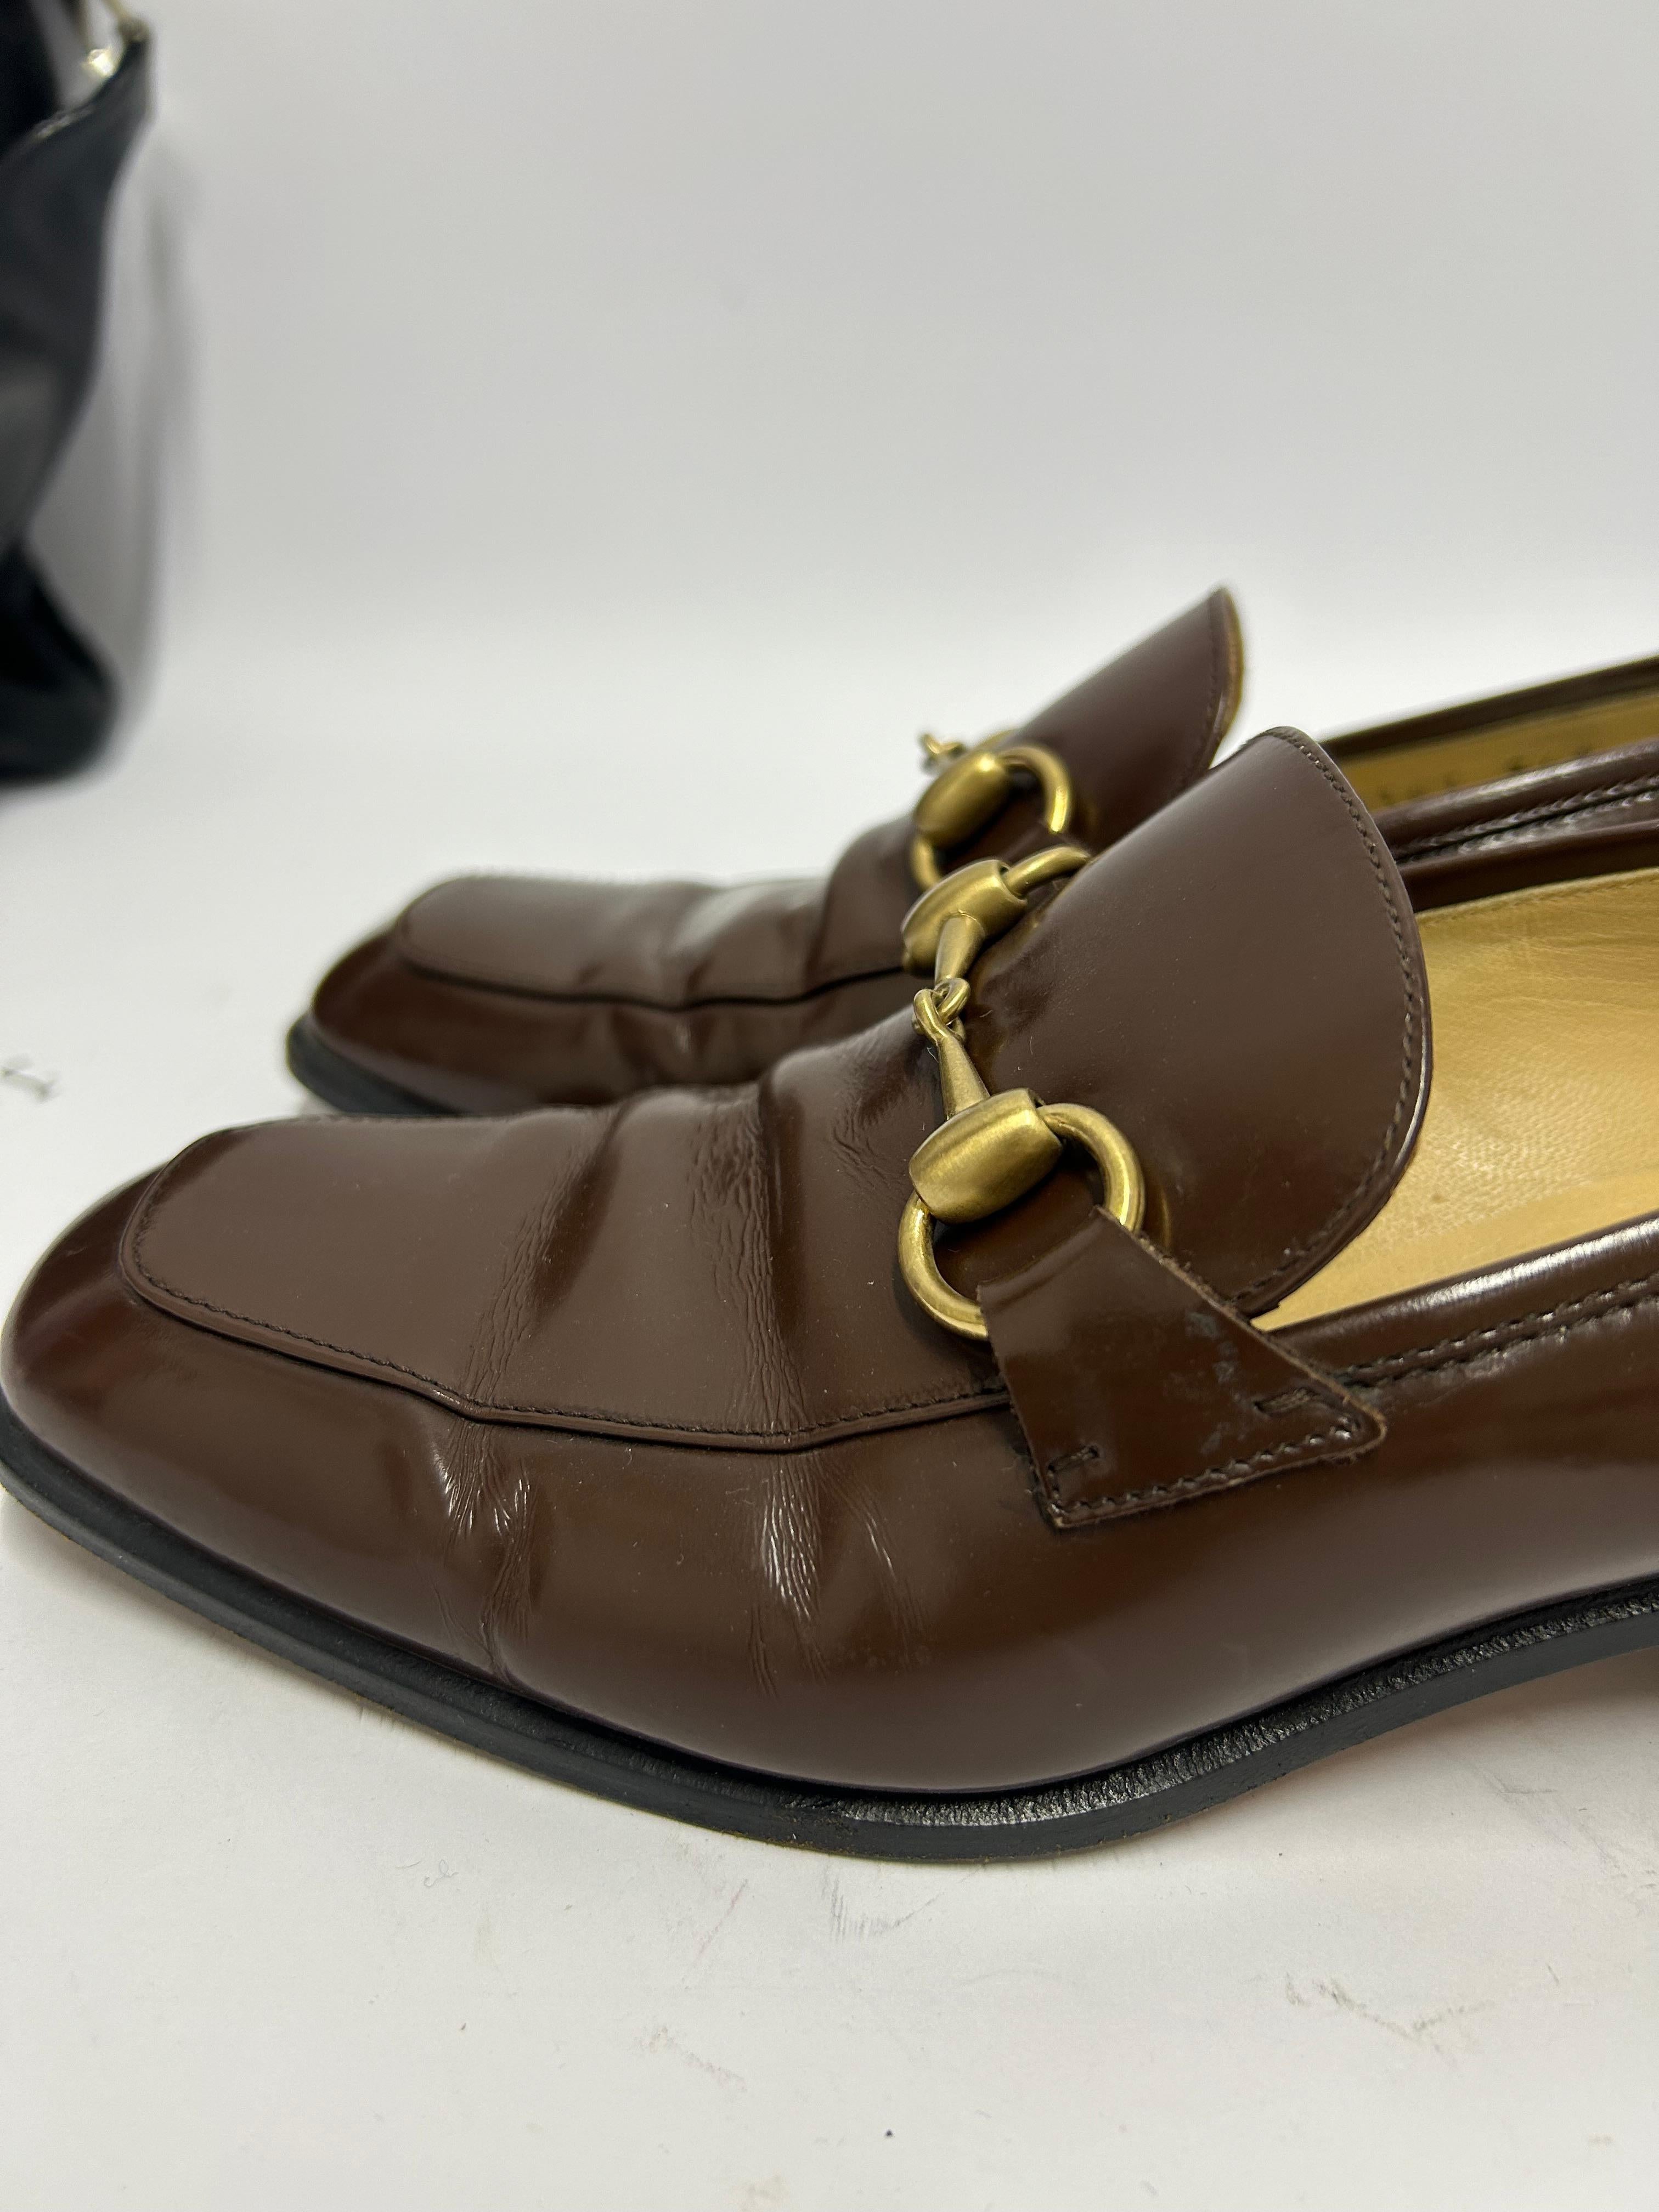 Gucci Horsebit Leather Loafers Size EU 36.5 For Sale 8